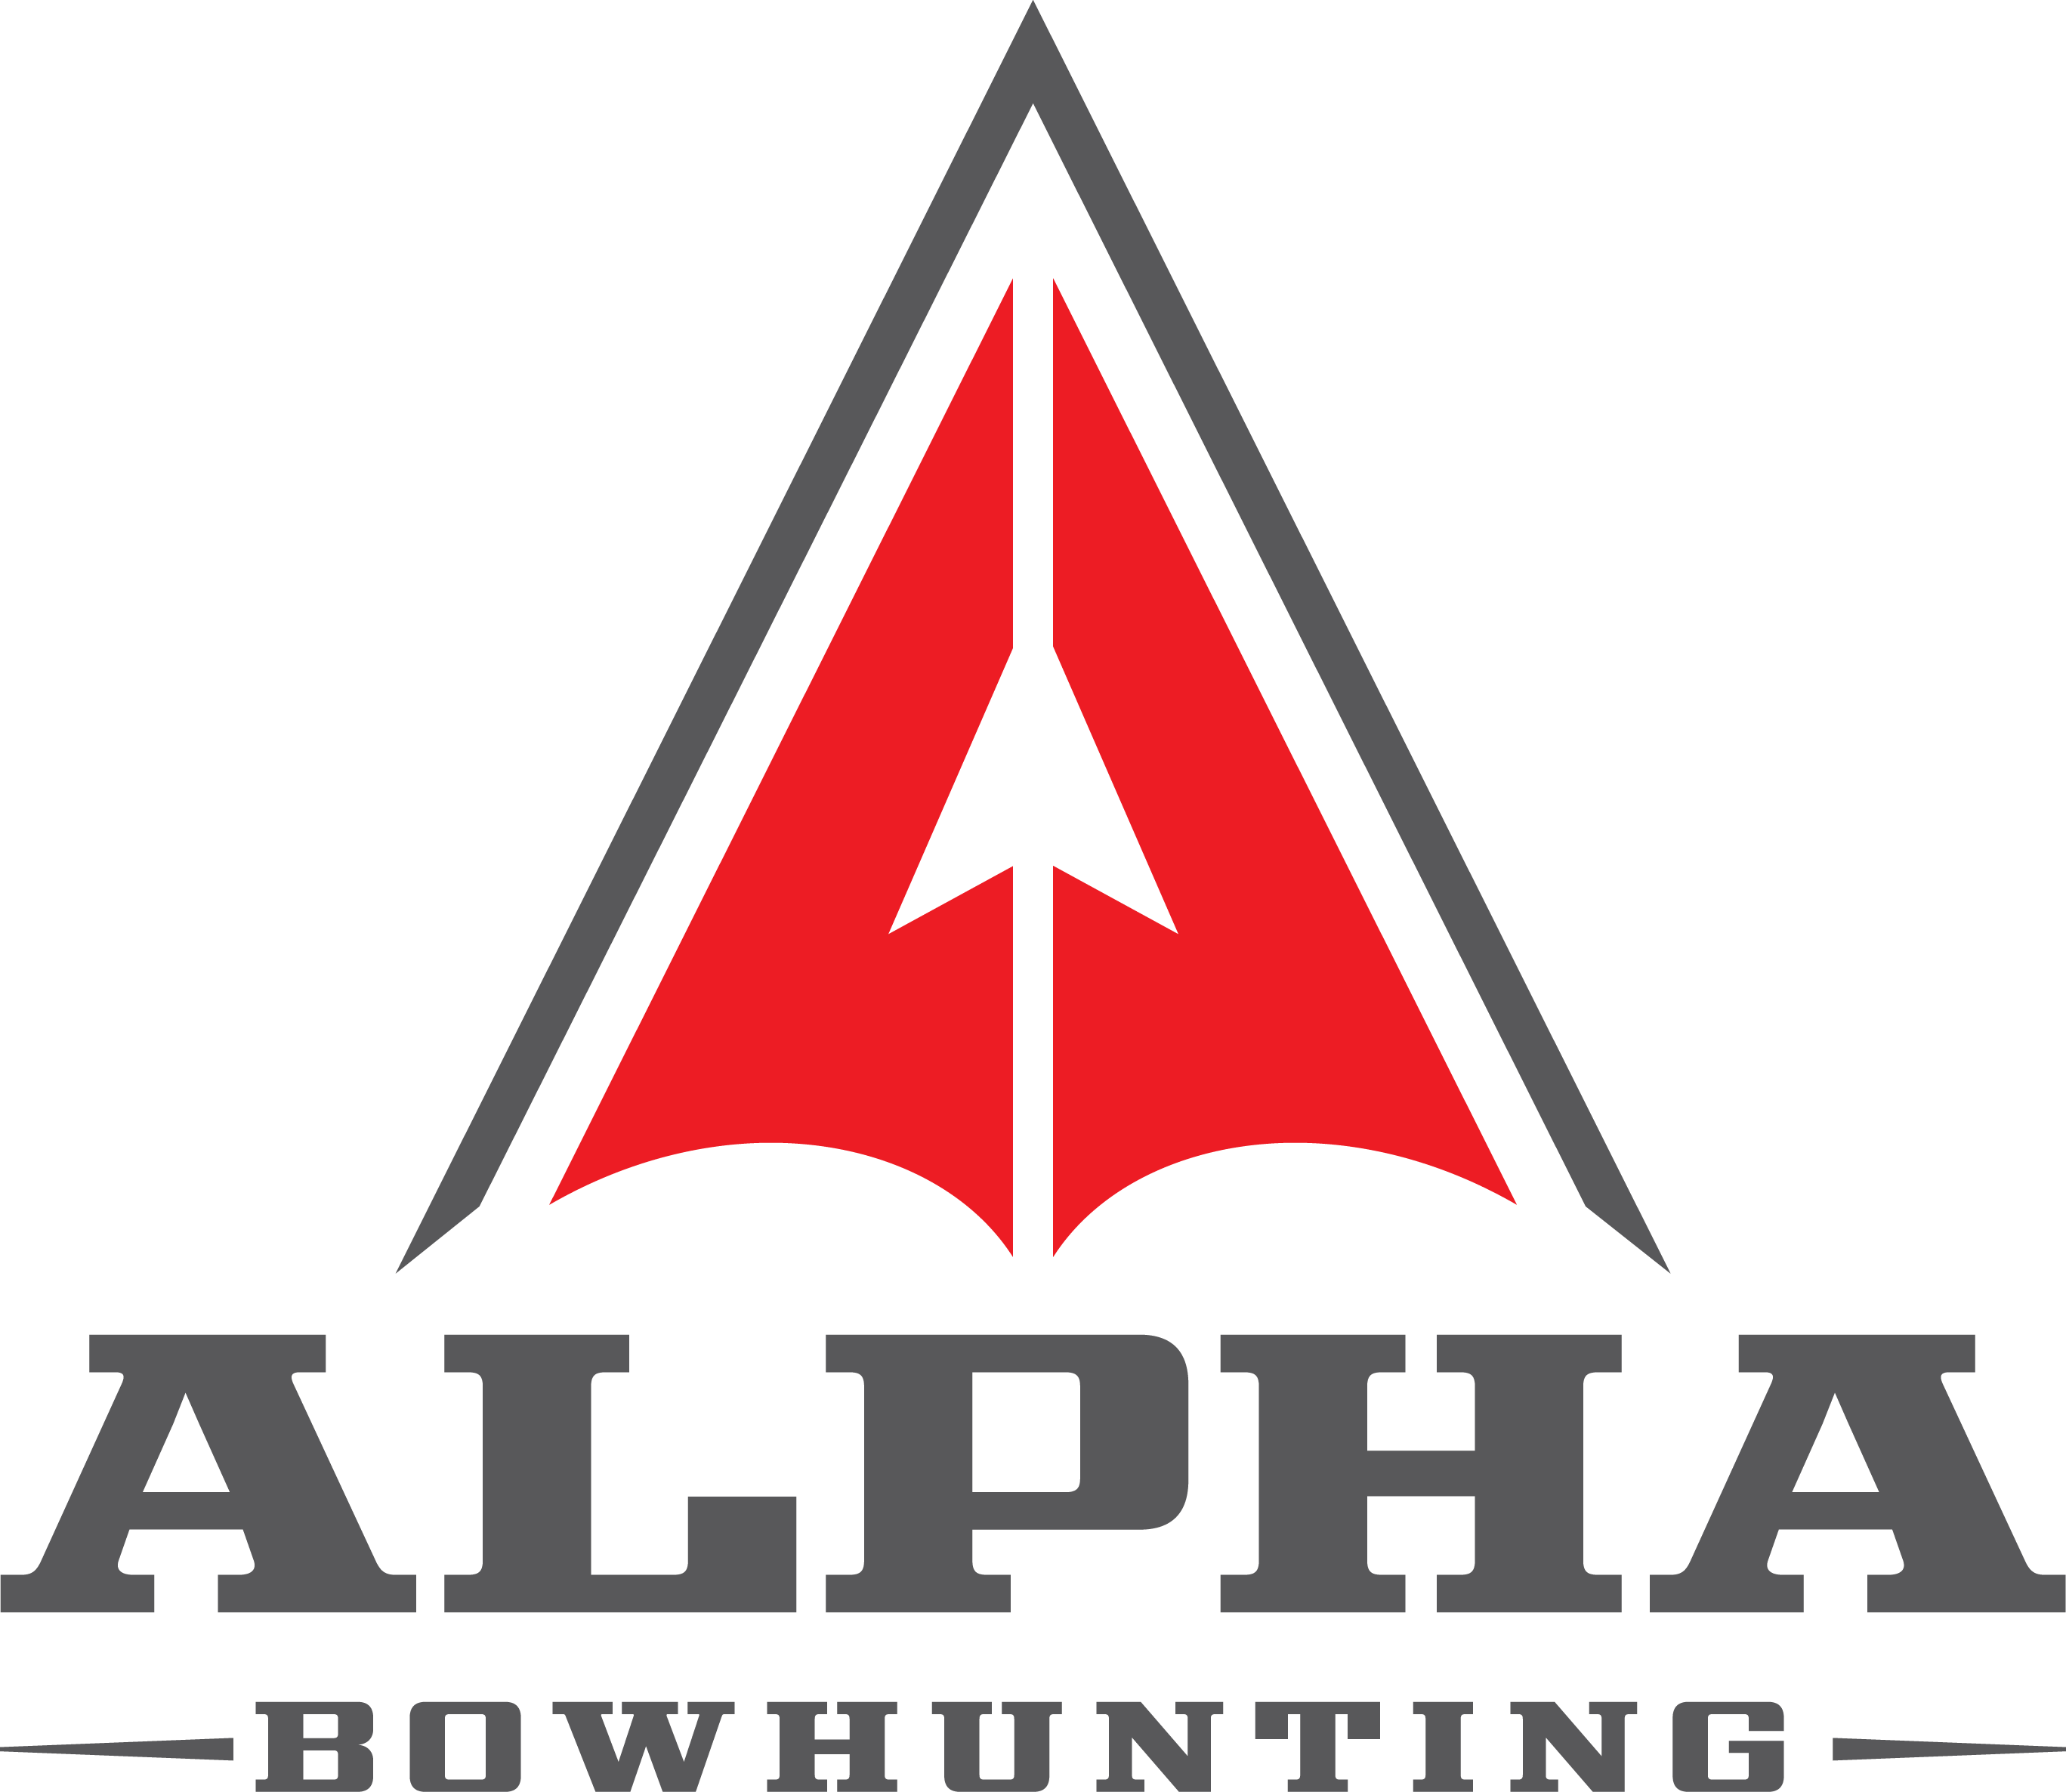 CB 56 - What to prepare for at the Alpha Bowhunting Challenge